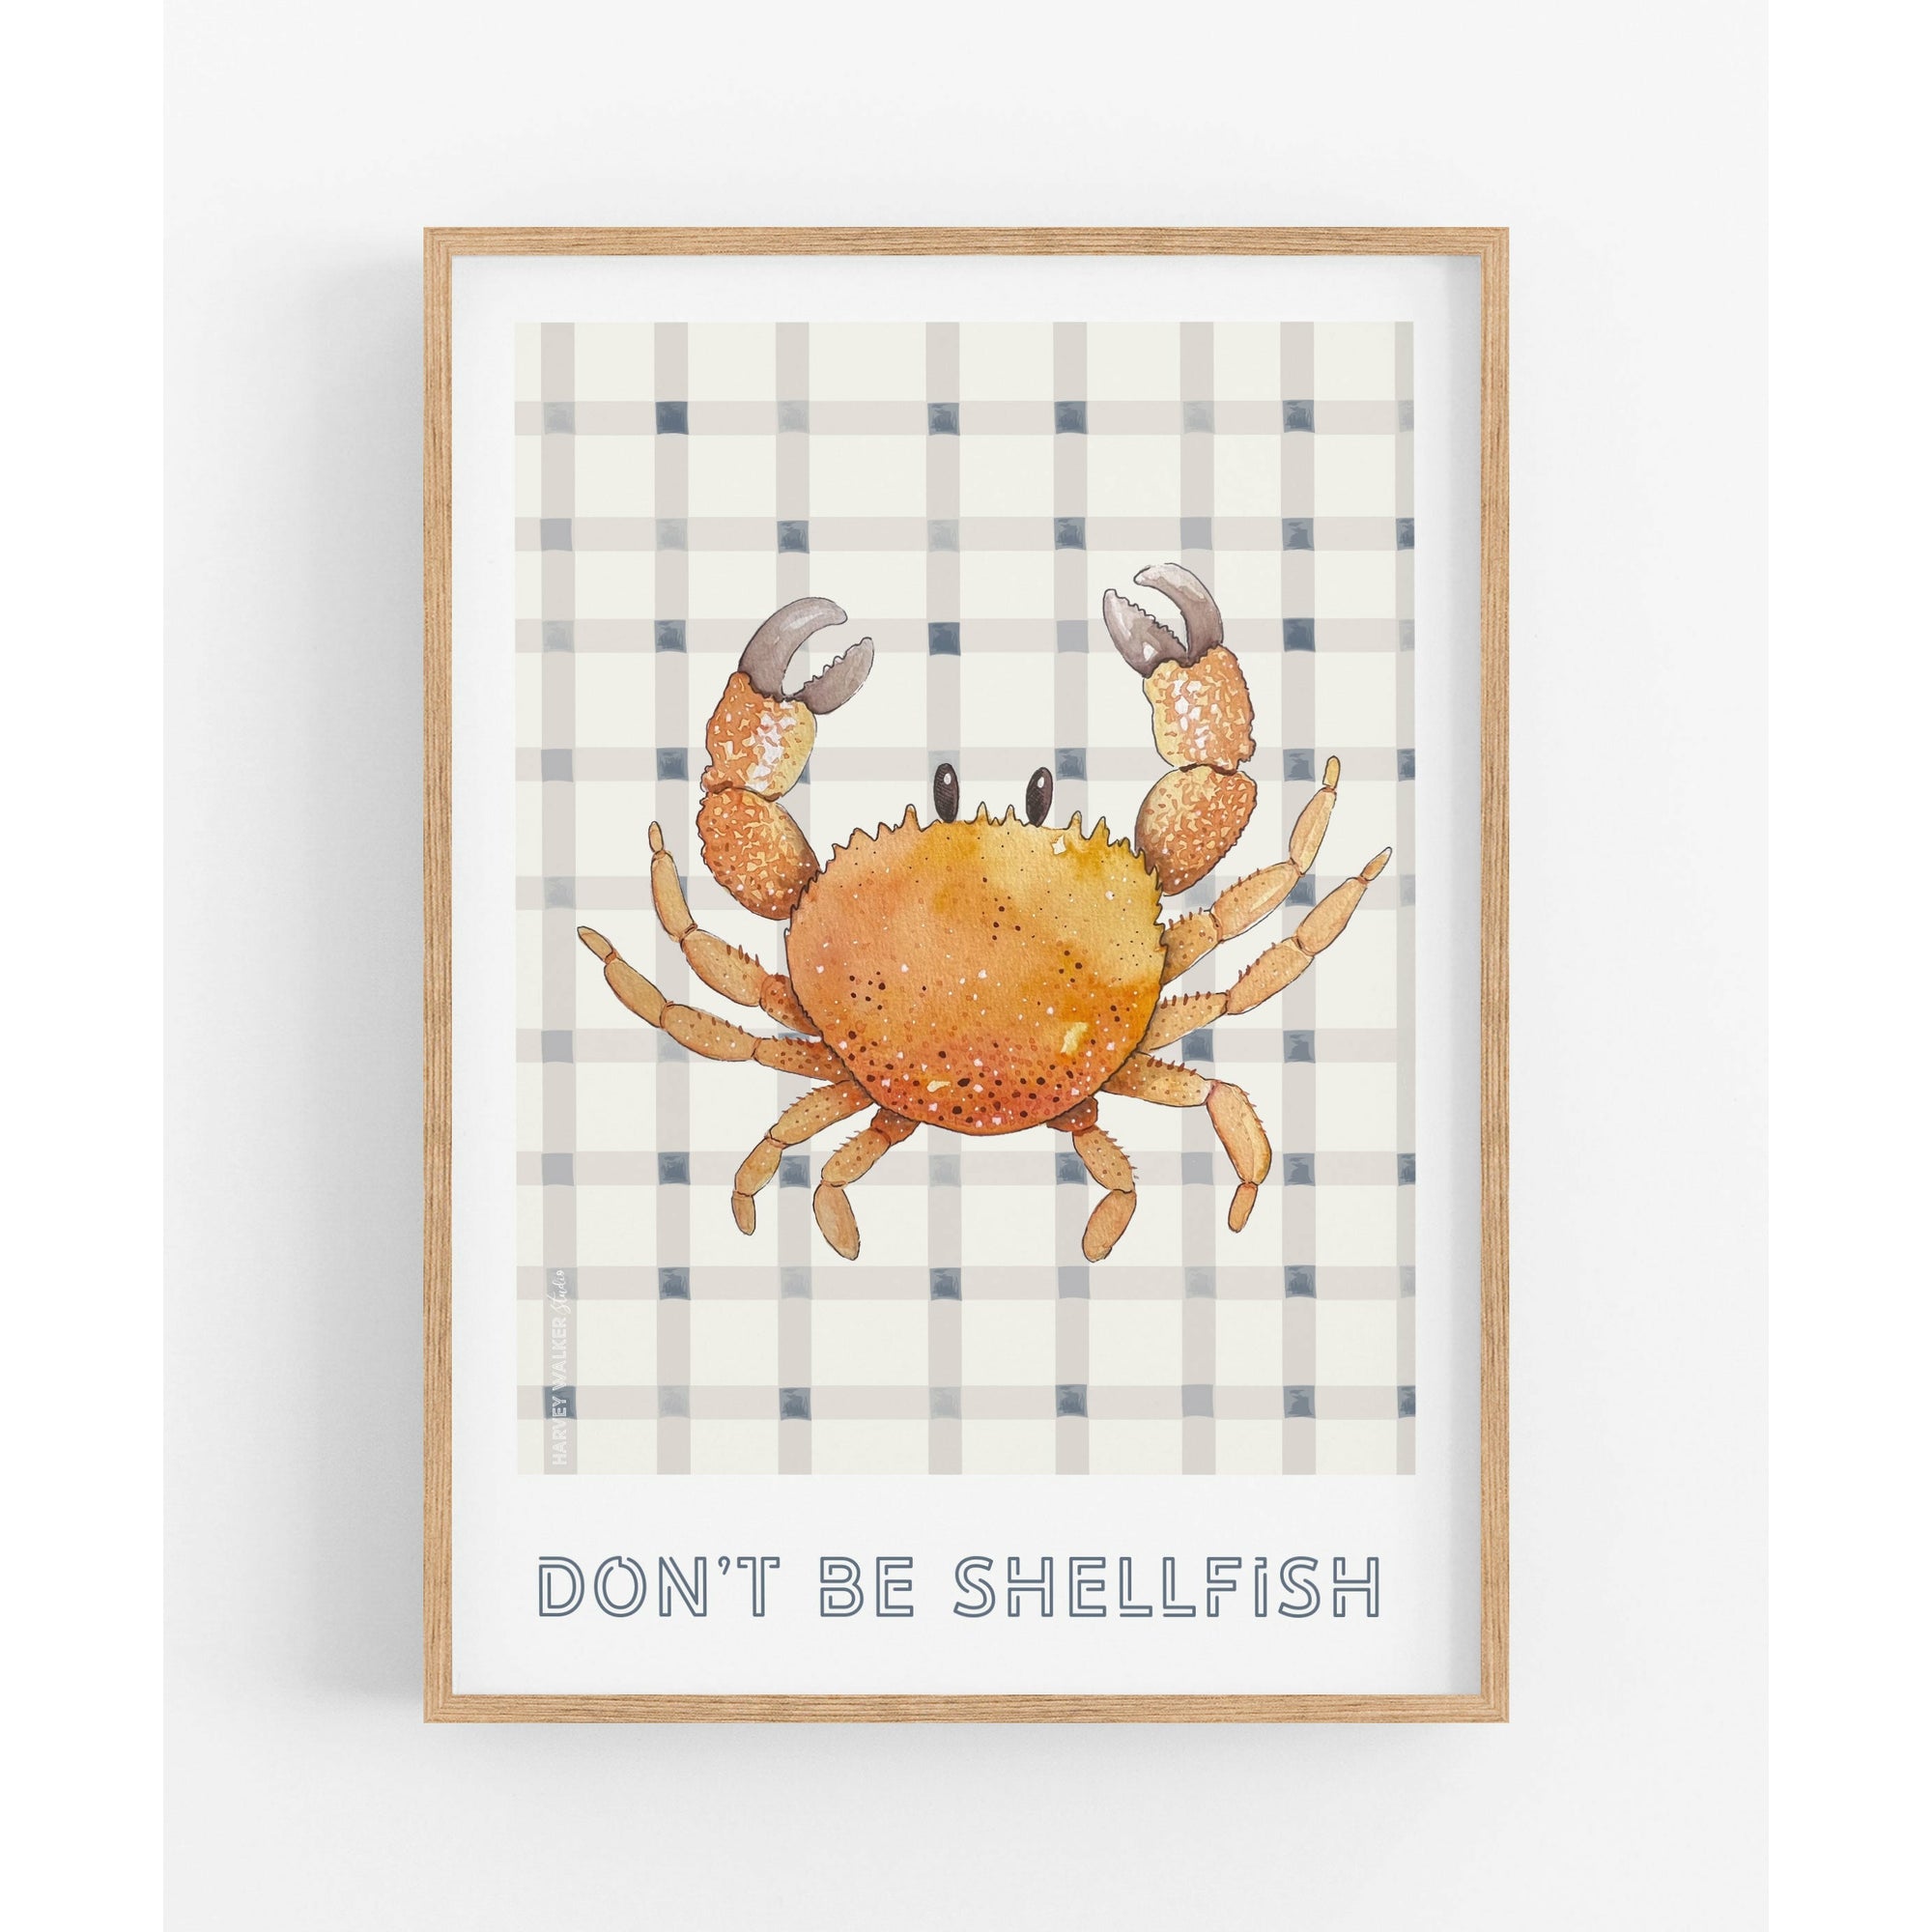 Crab illustration on textured cotton rag paper. Hand illustrated image of shellfish, with a kids quote of " dont be shellfish' is a great addition to any classic hamptons house or modern coastal home. The gingham has soft being and light navy colours, the crab is orange and warm grey.